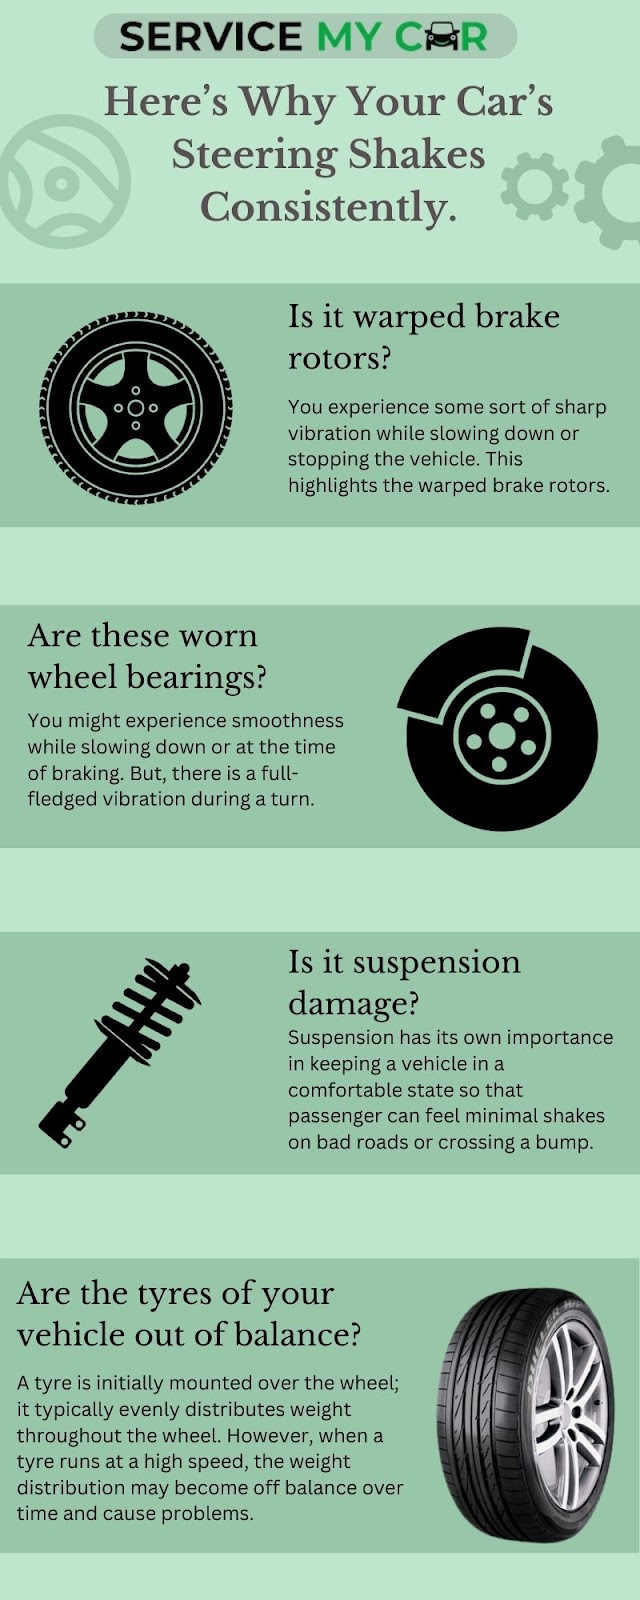 Here’s Why Your Car's Steering Shakes Consistently.